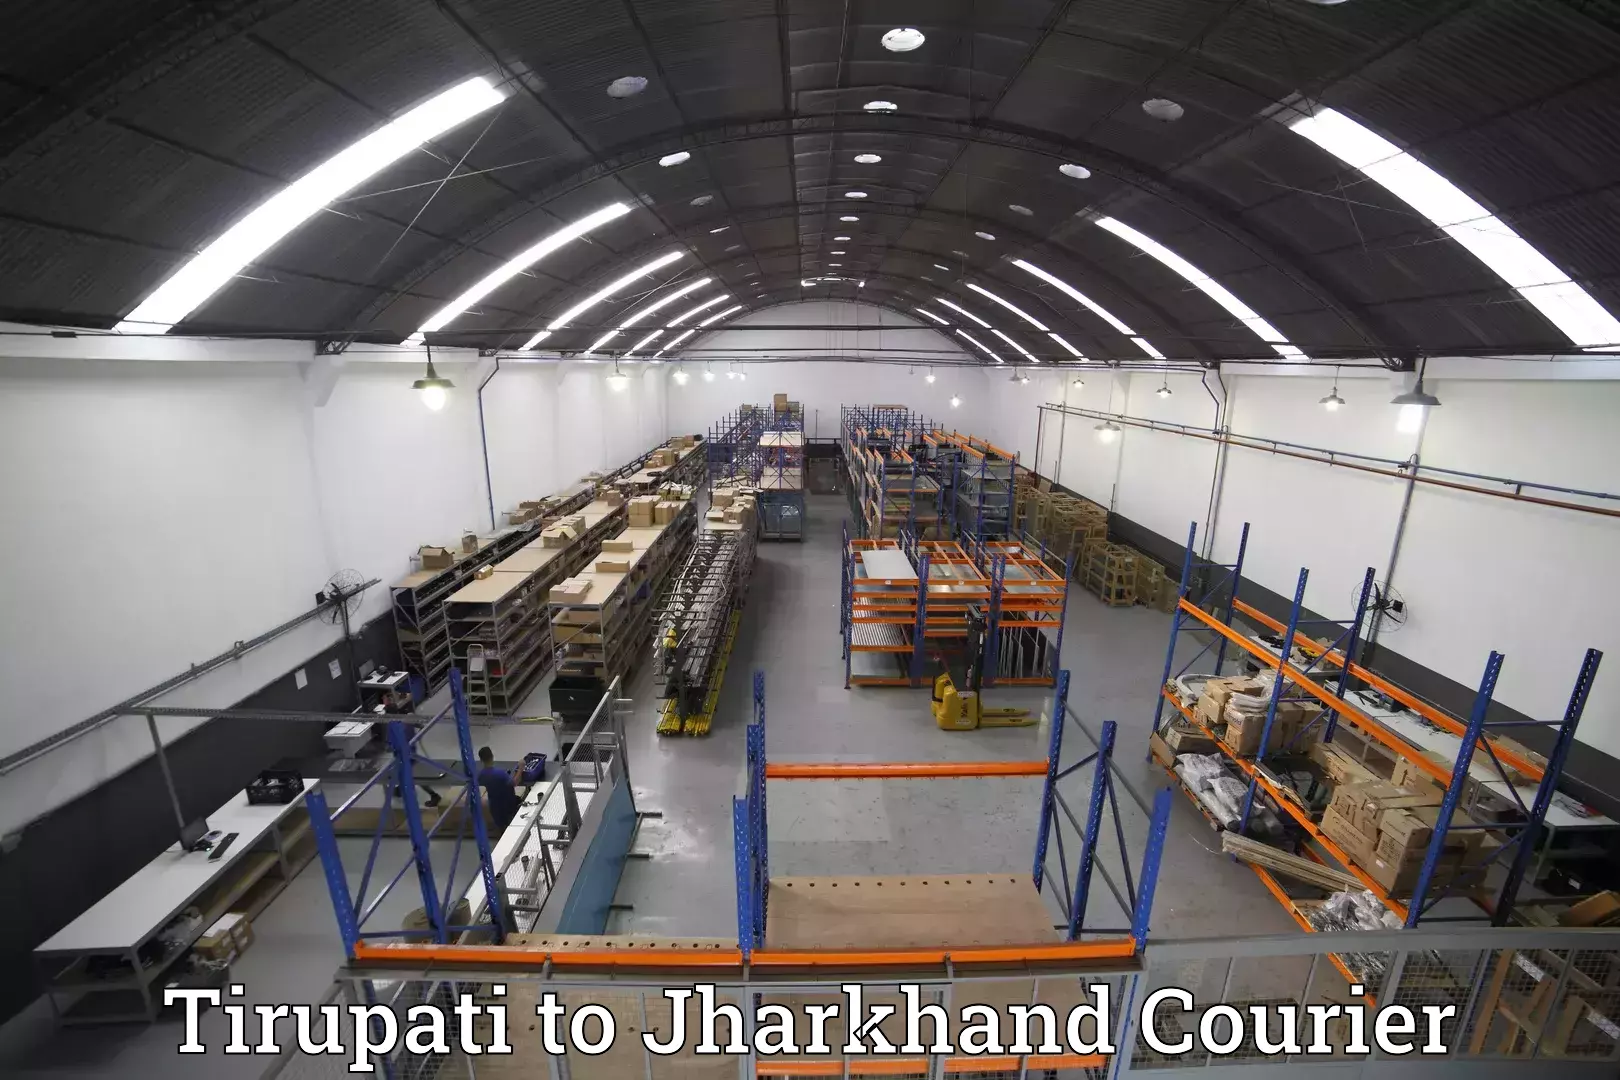 Luggage storage and delivery in Tirupati to Jamshedpur